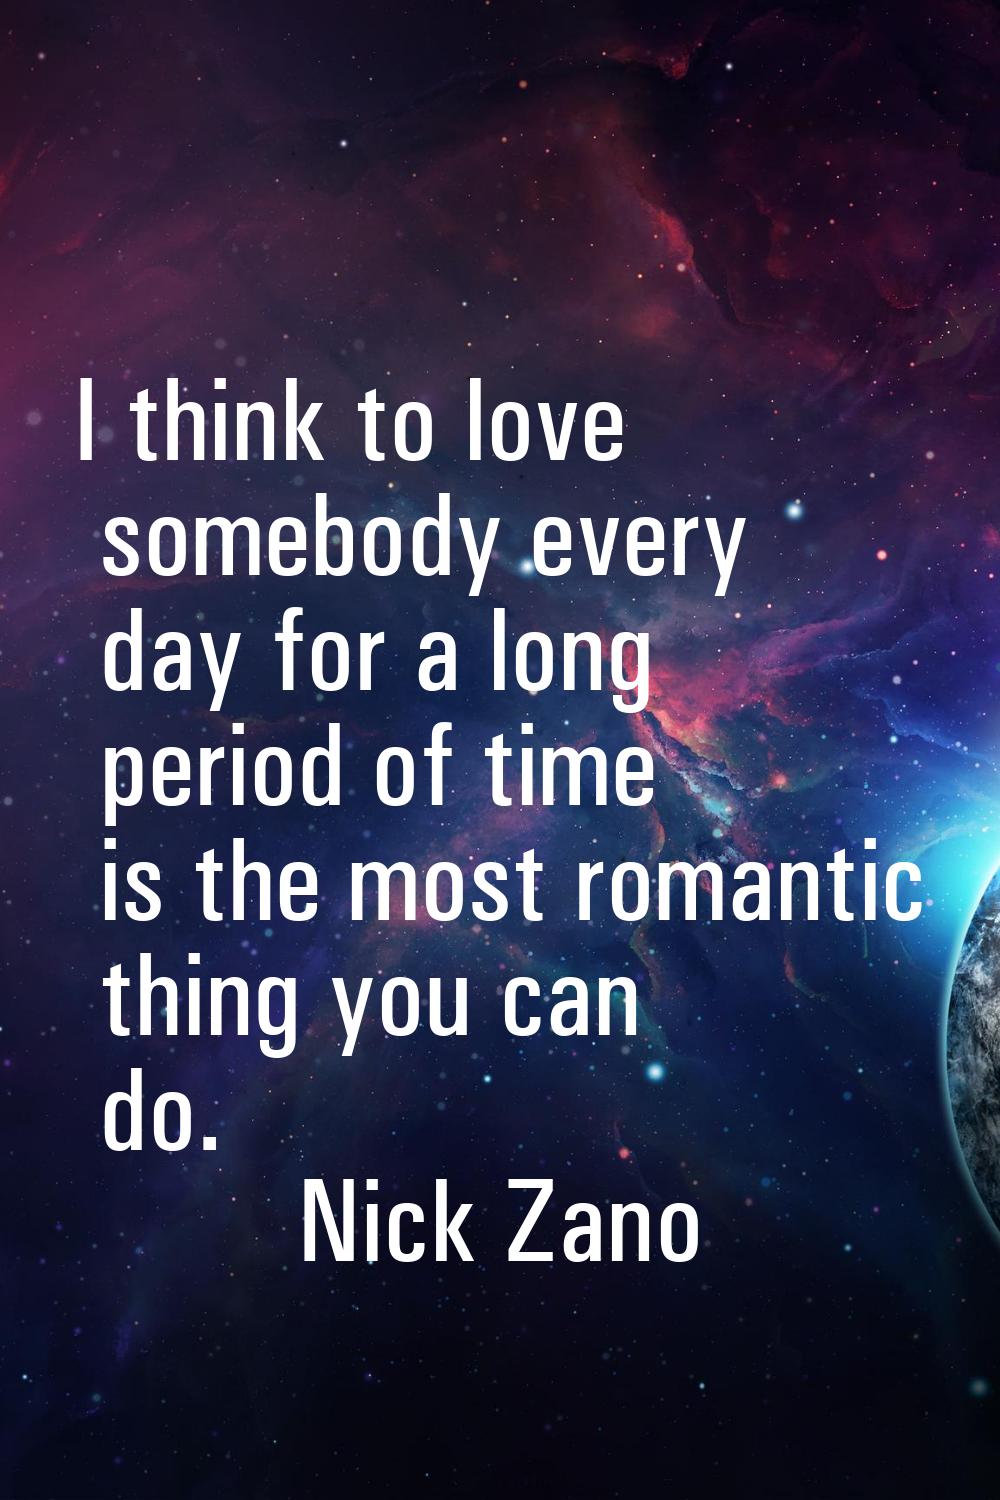 I think to love somebody every day for a long period of time is the most romantic thing you can do.